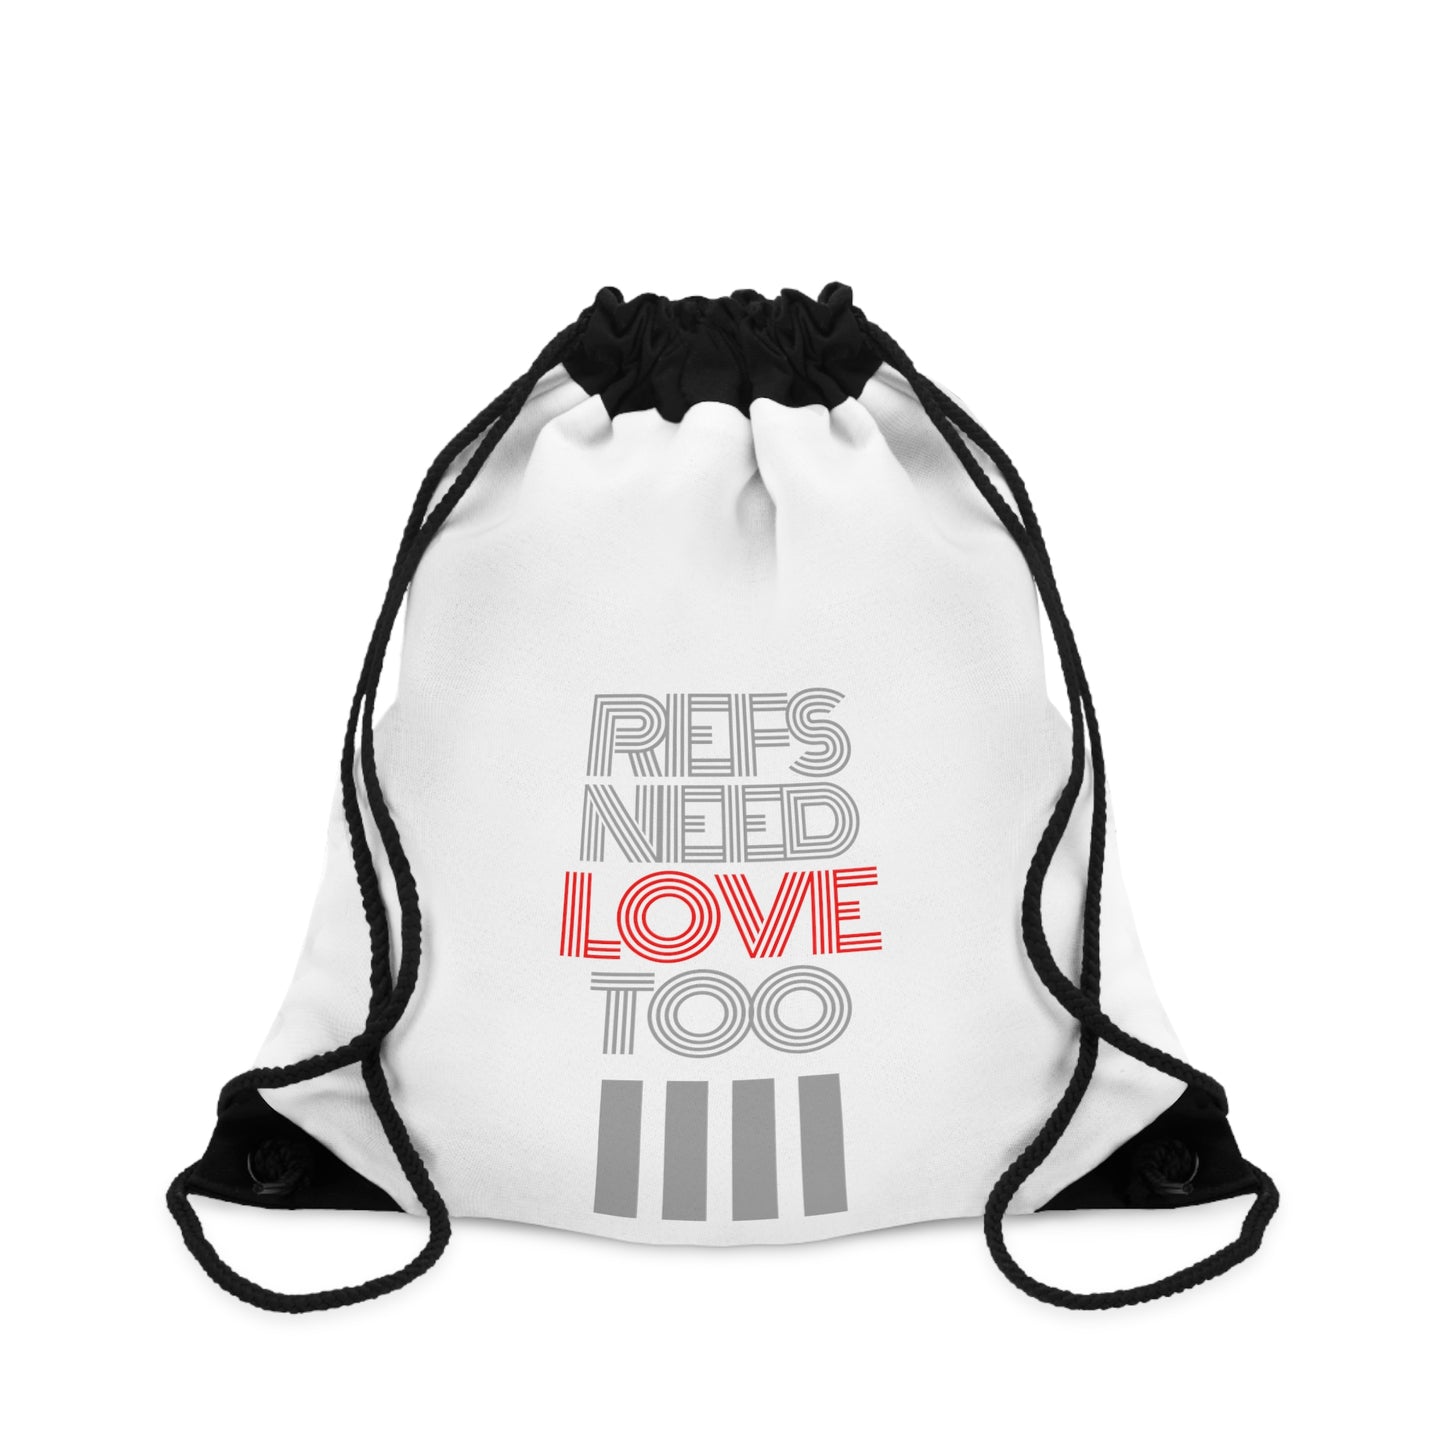 Refs Need Love Too Drawstring Bag | Perfect Referee Shoe Bag | Gifts for Refs | White Lightweight Shoe Tote | Ref Gym Bag | For sports officials